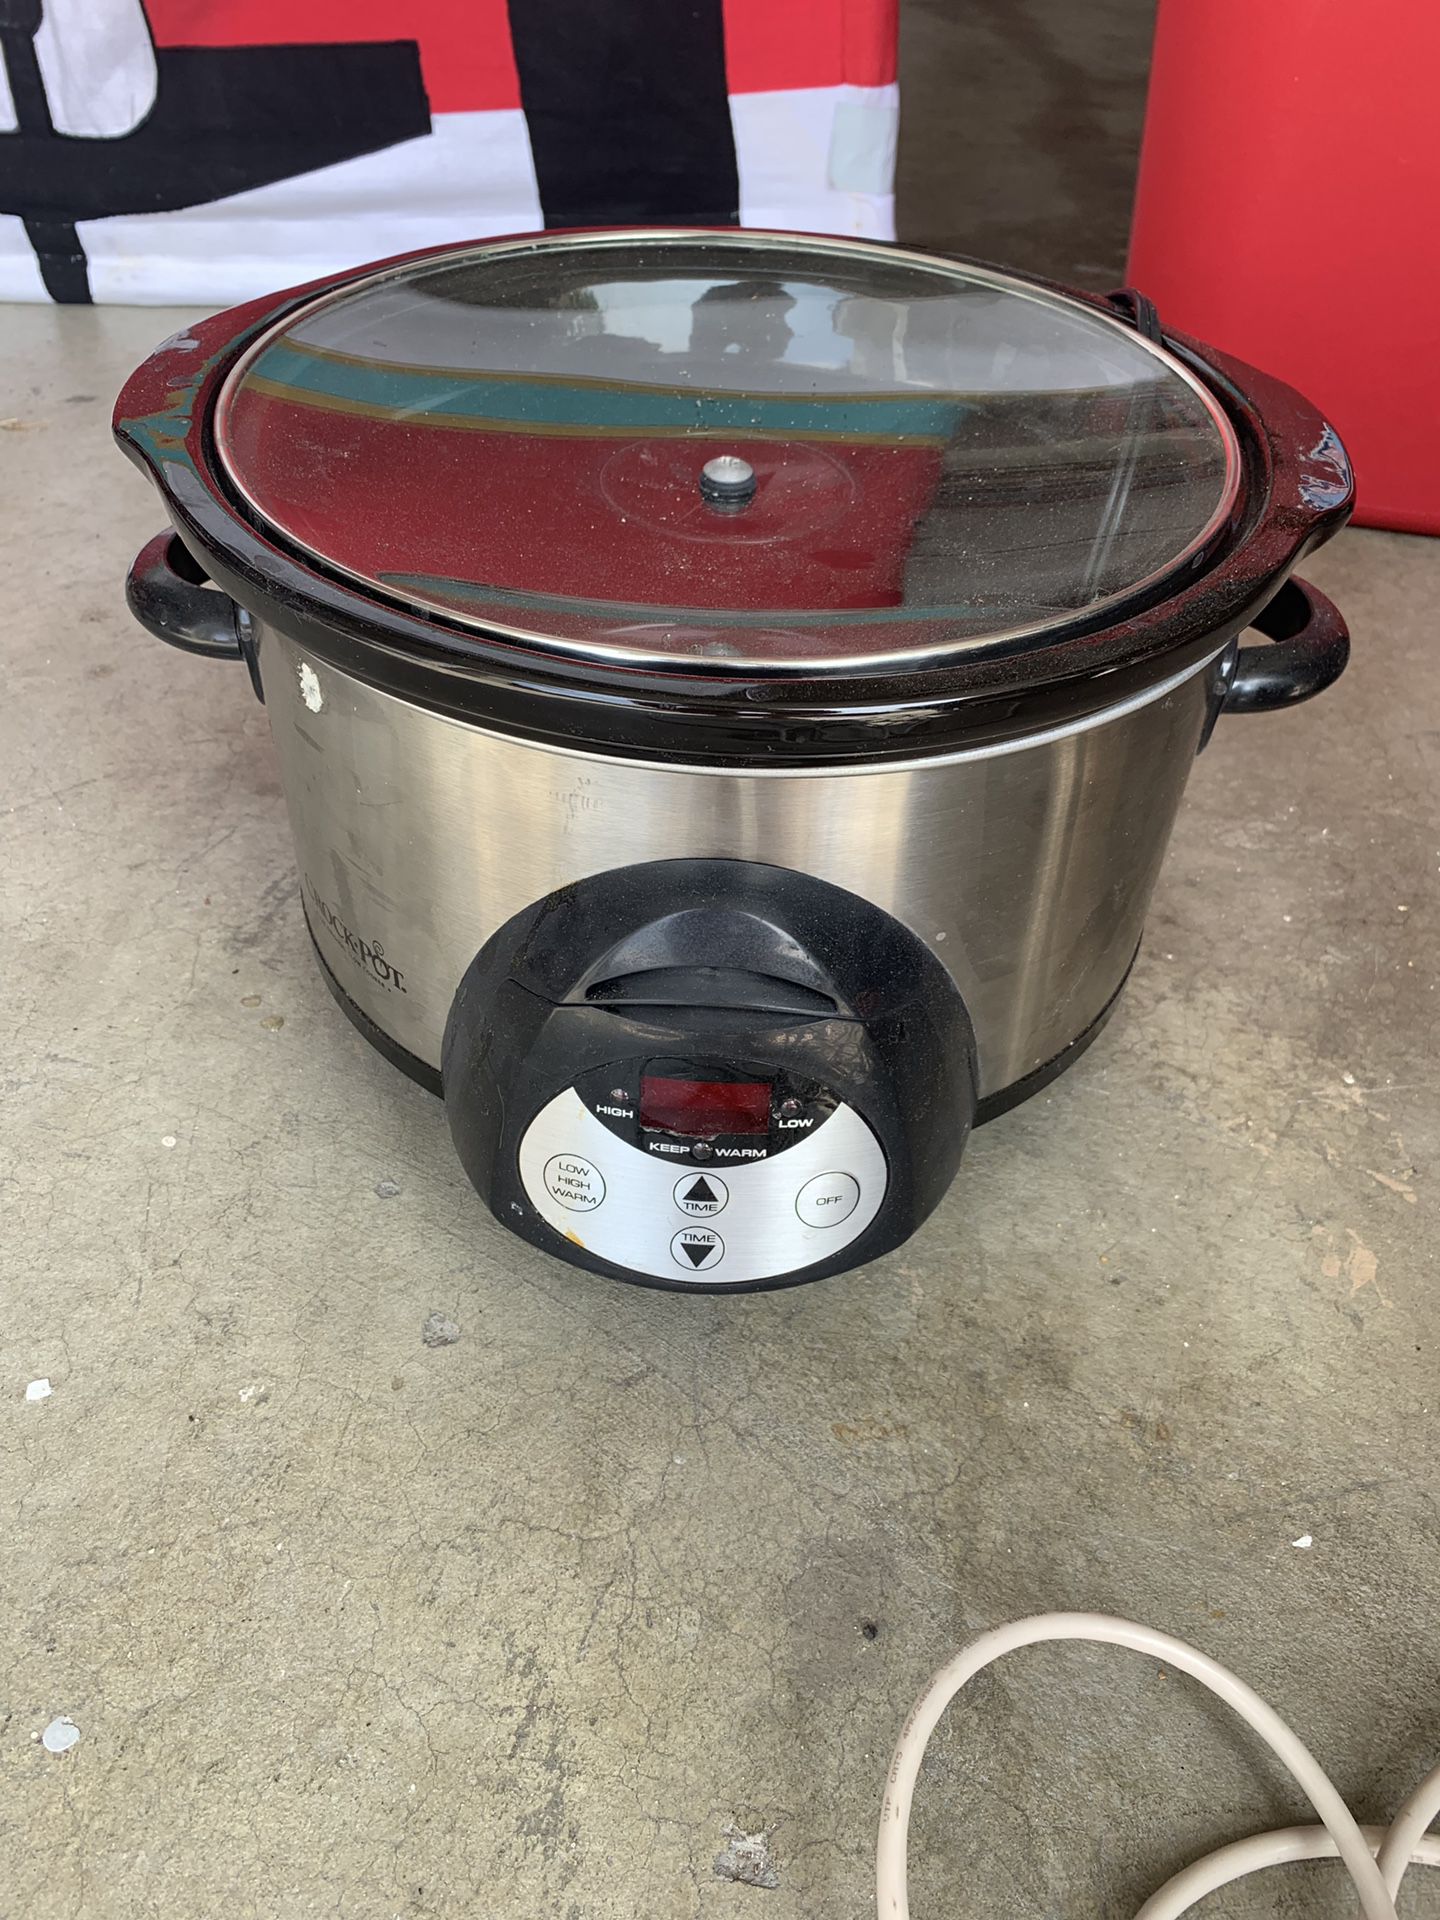 Perfectly working crock pot